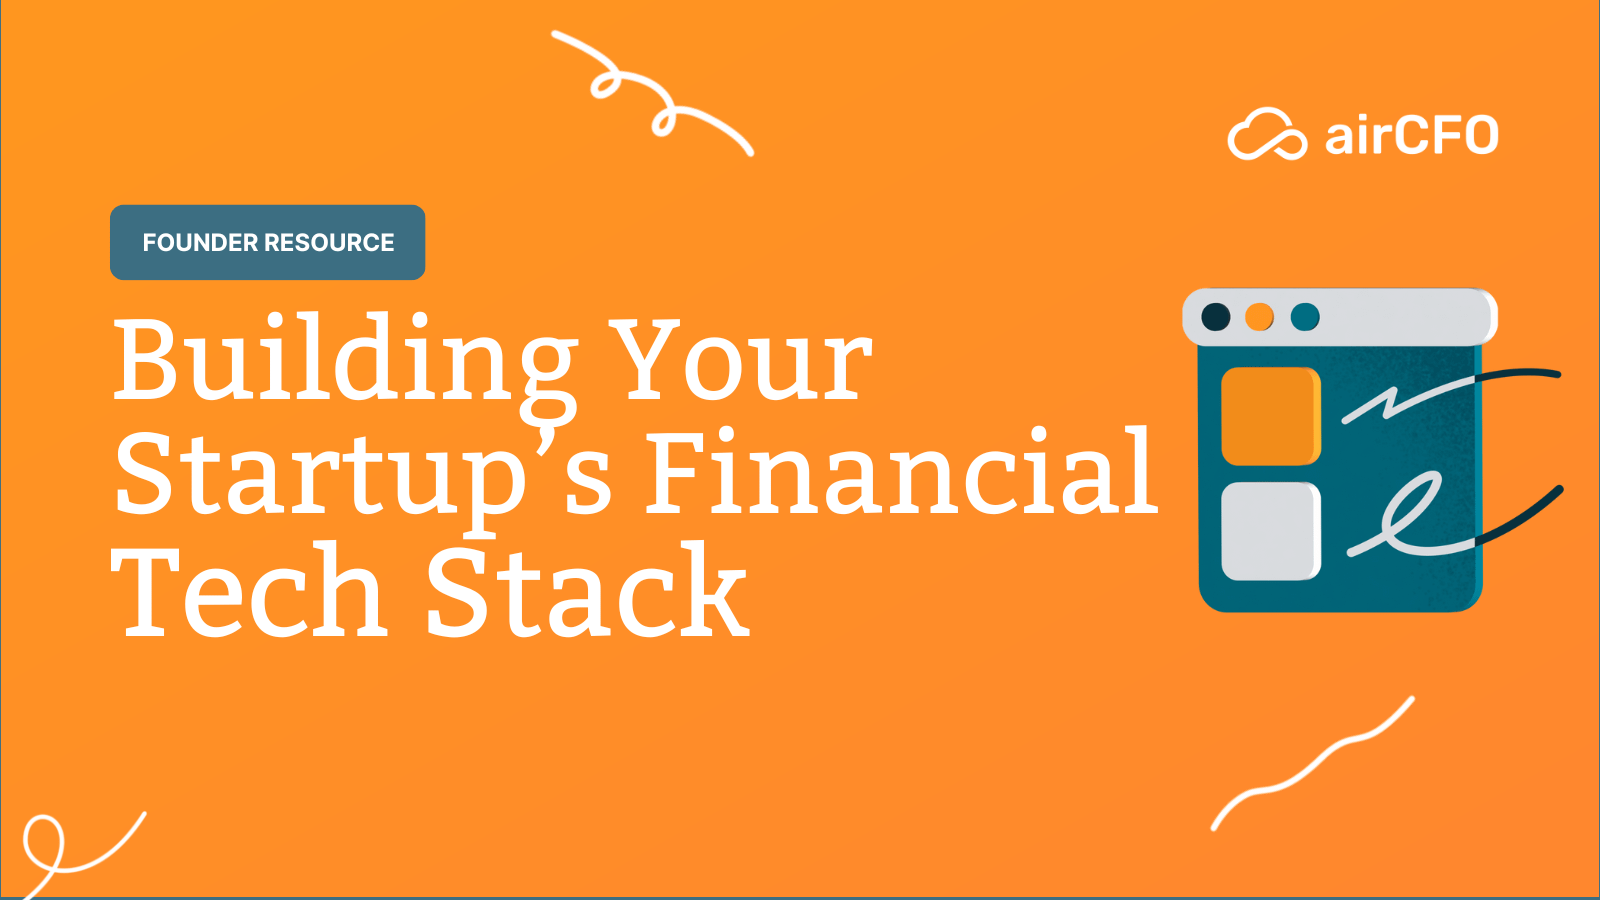 The Ultimate Guide to Building Your Startup’s Financial Tech Stack